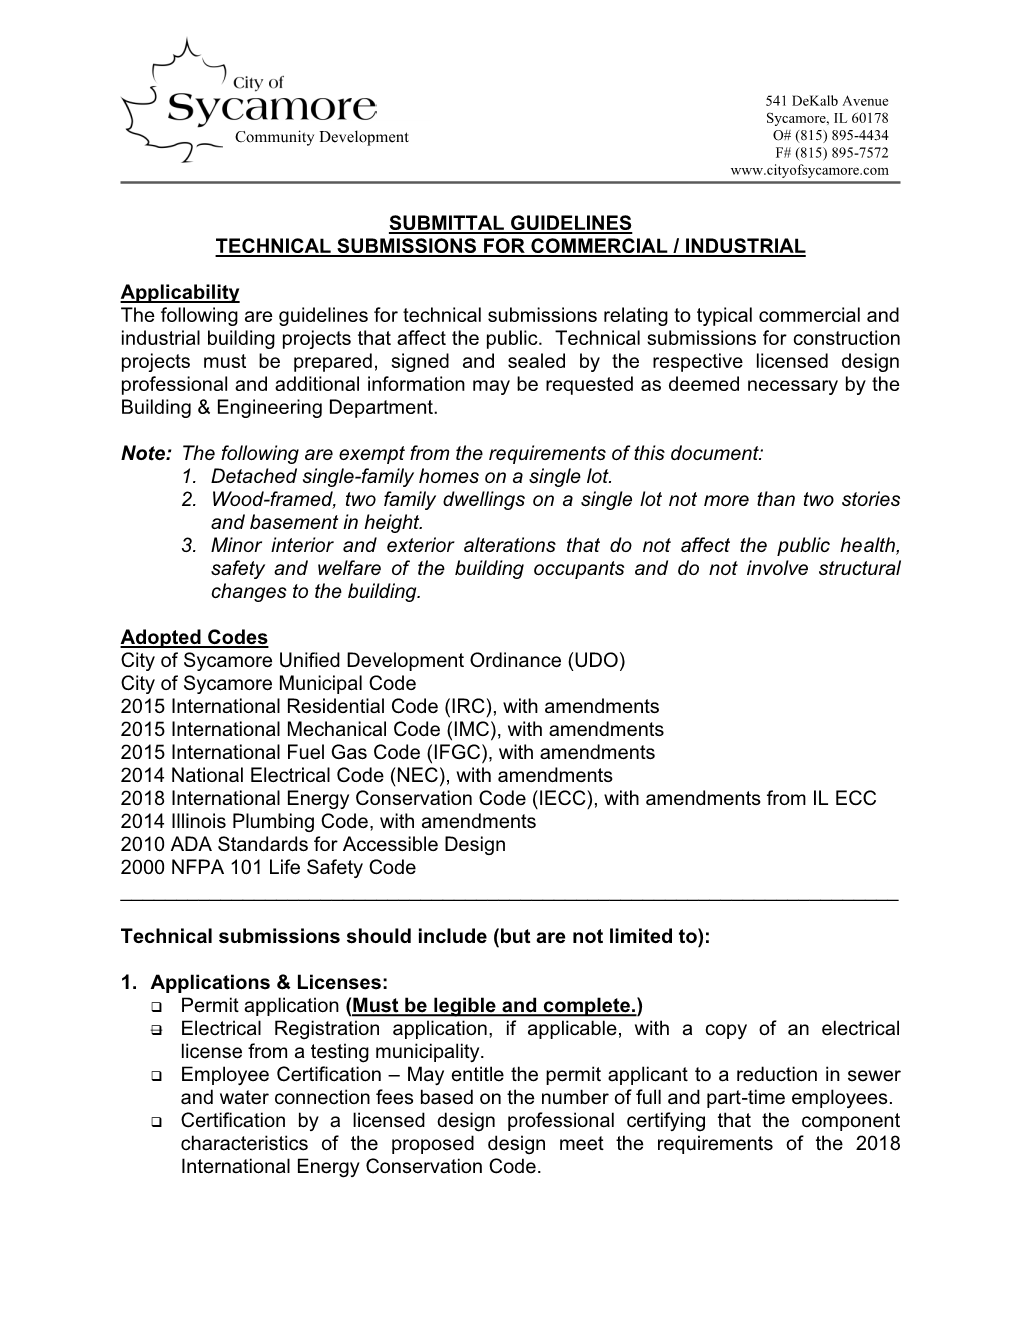 Required Submittals – Commercial/Industrial